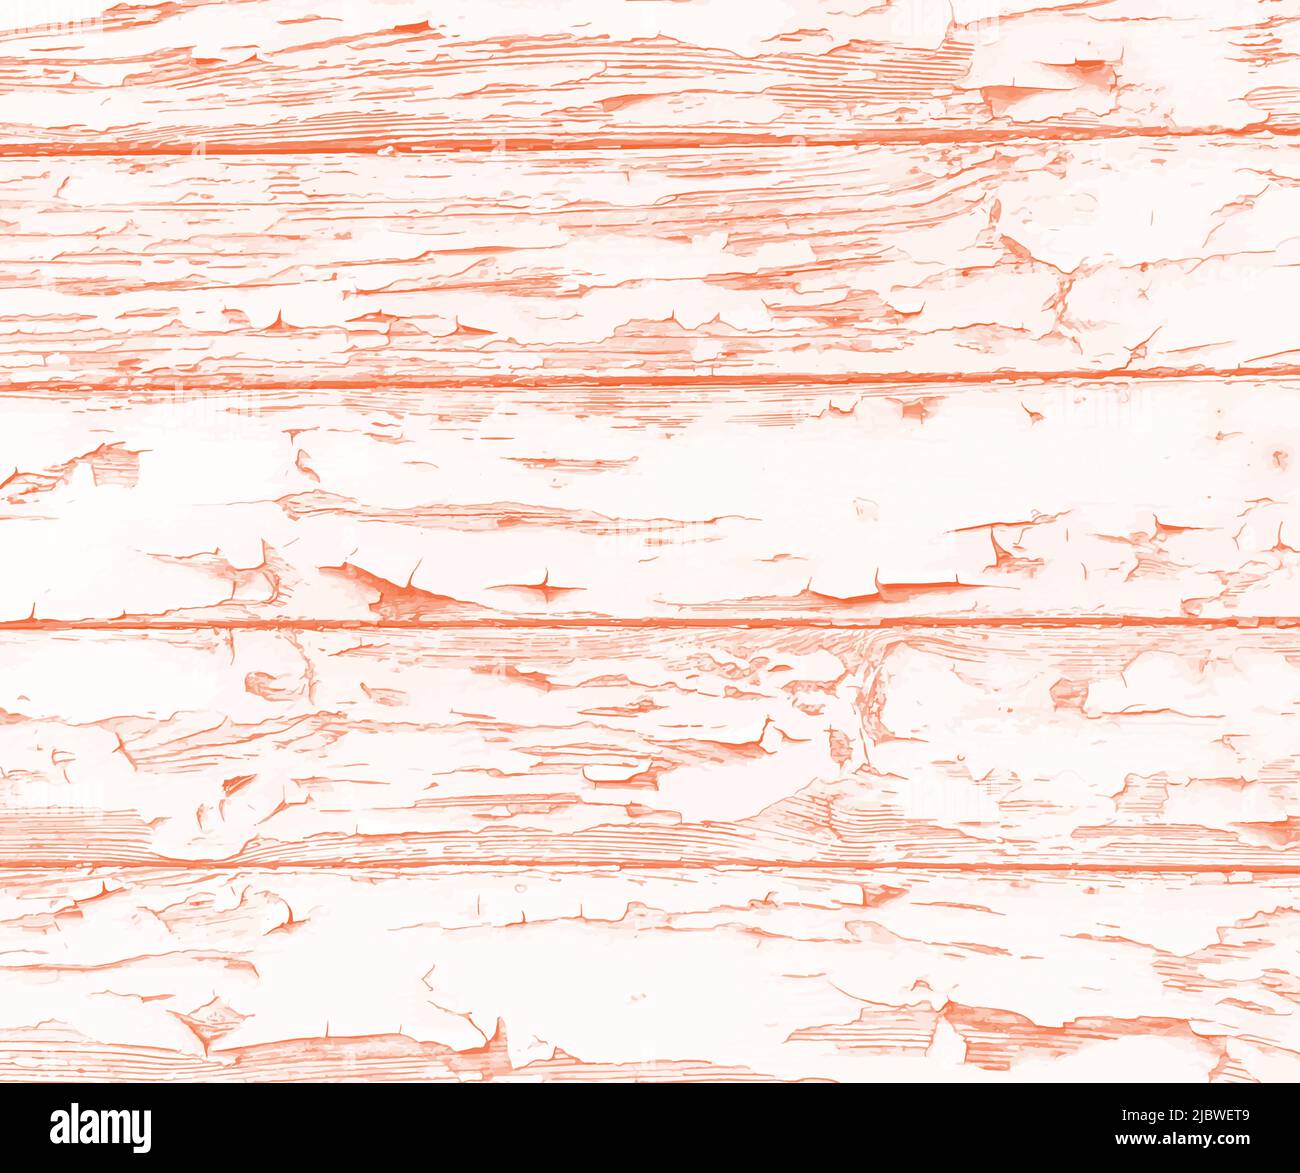 surface is made of wooden boards. Vector illustration for creative design and simple backgrounds Stock Vector